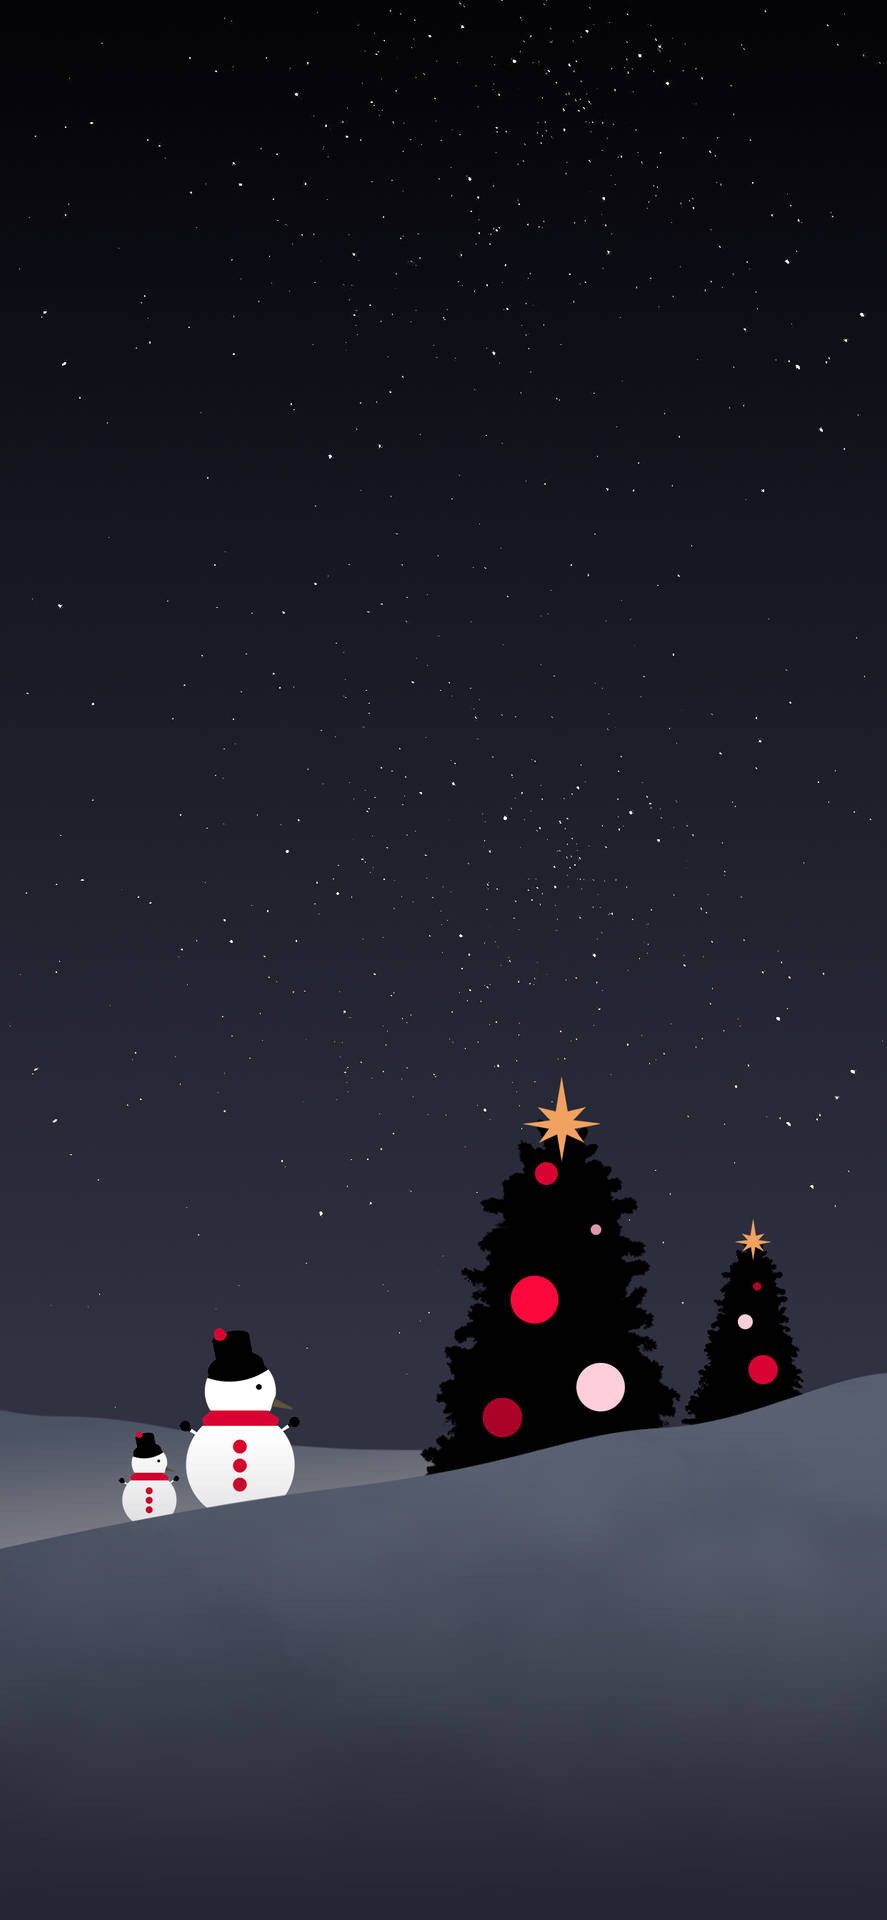 Christmas Tree And Snowman In The Snow Wallpaper